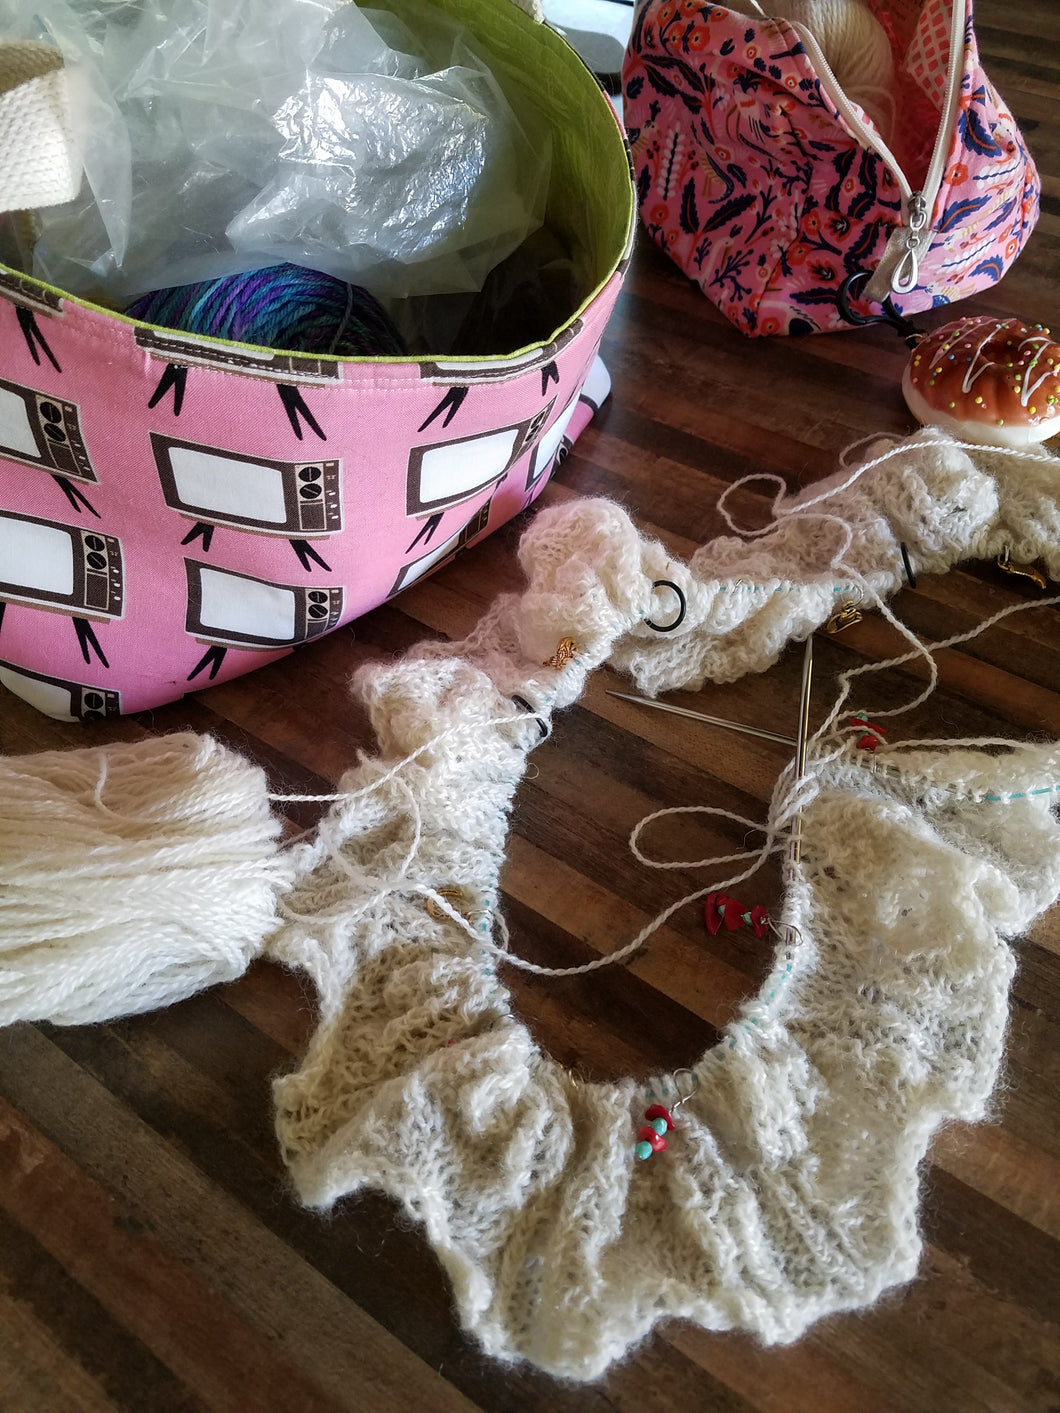 Knitting 9-1-1. Next Session Friday October 19th